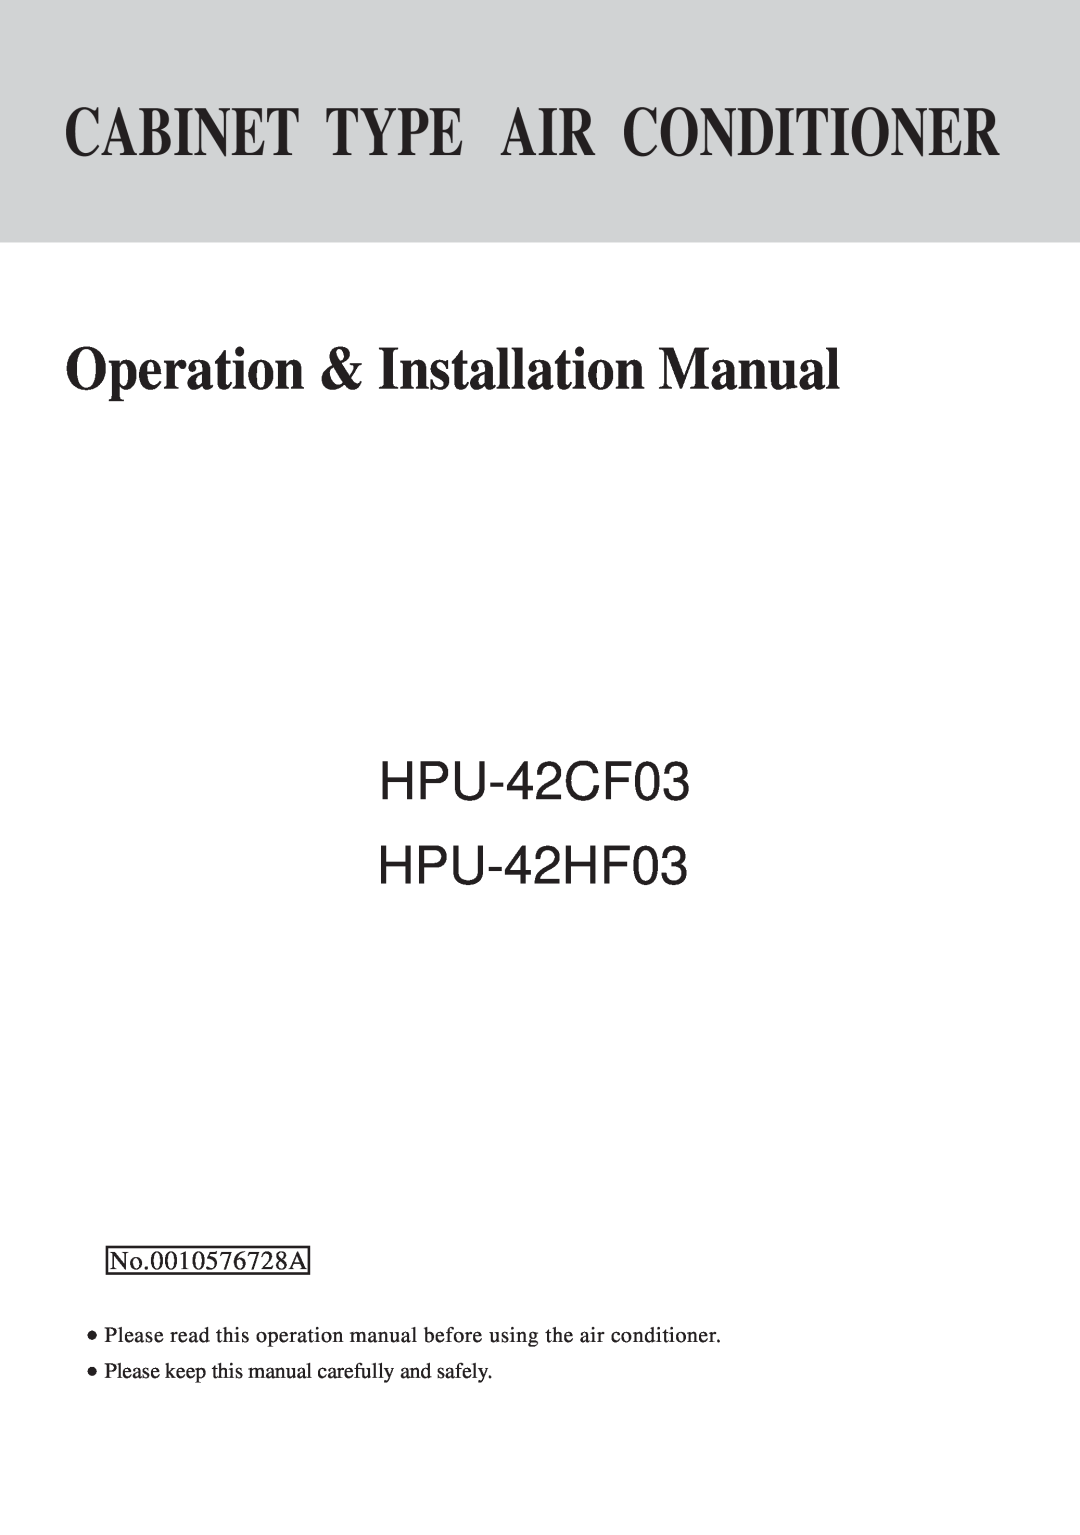 Haier HPU-42CF03 operation manual No.0010576728A, Operation & Installation Manual, Cabinet Type Air Conditioner 